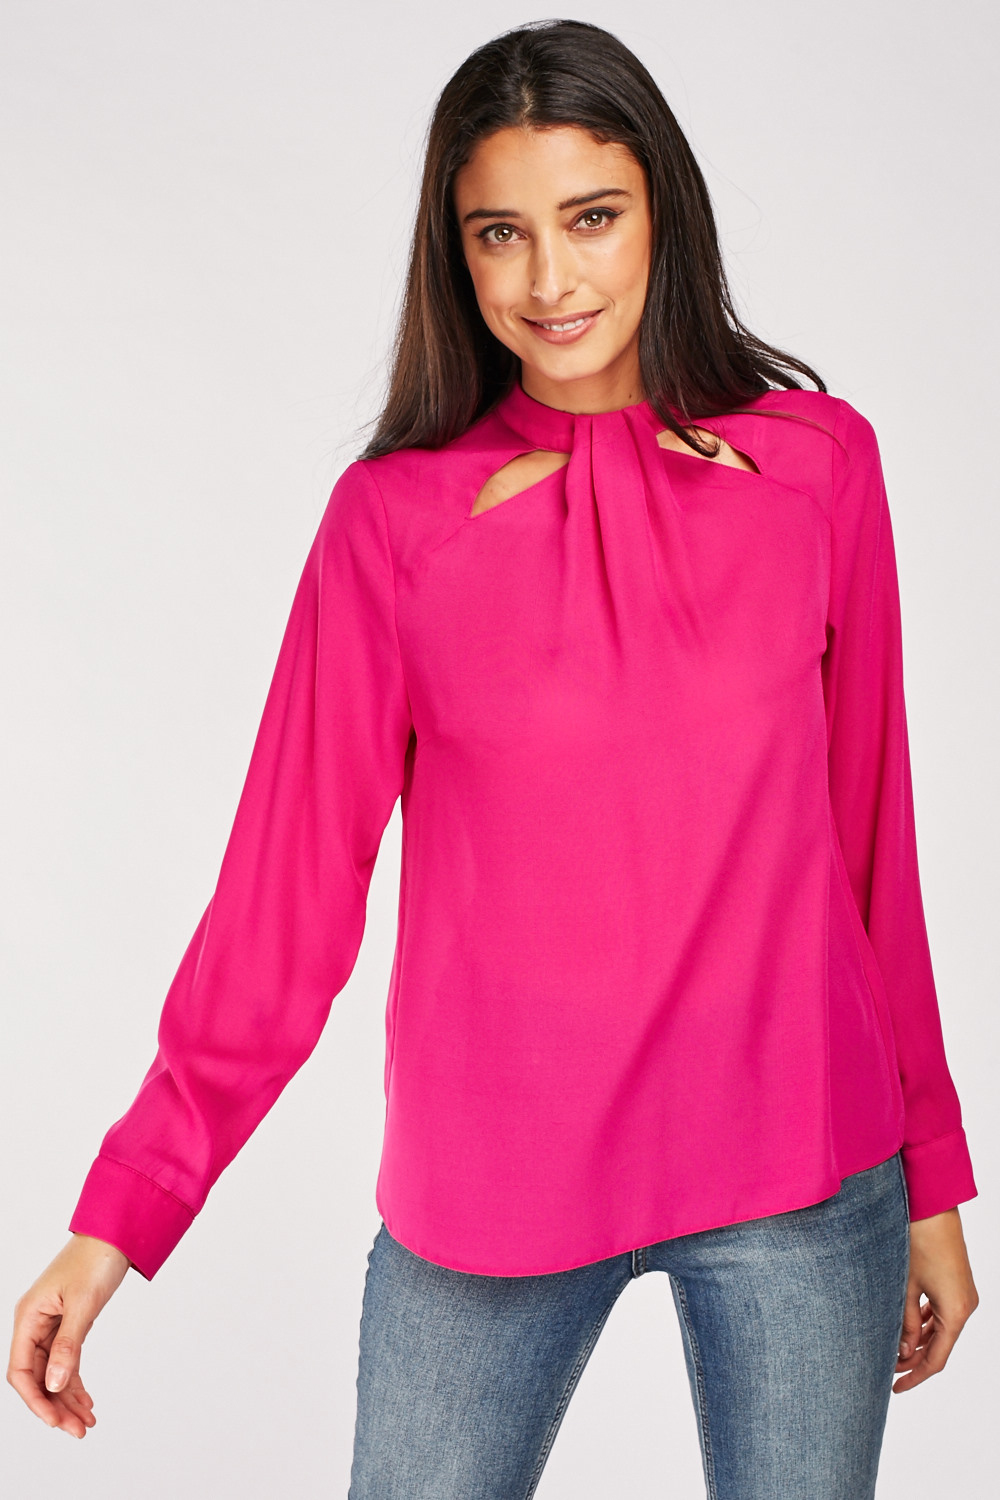 Keyhole Front Blouse - Just $7